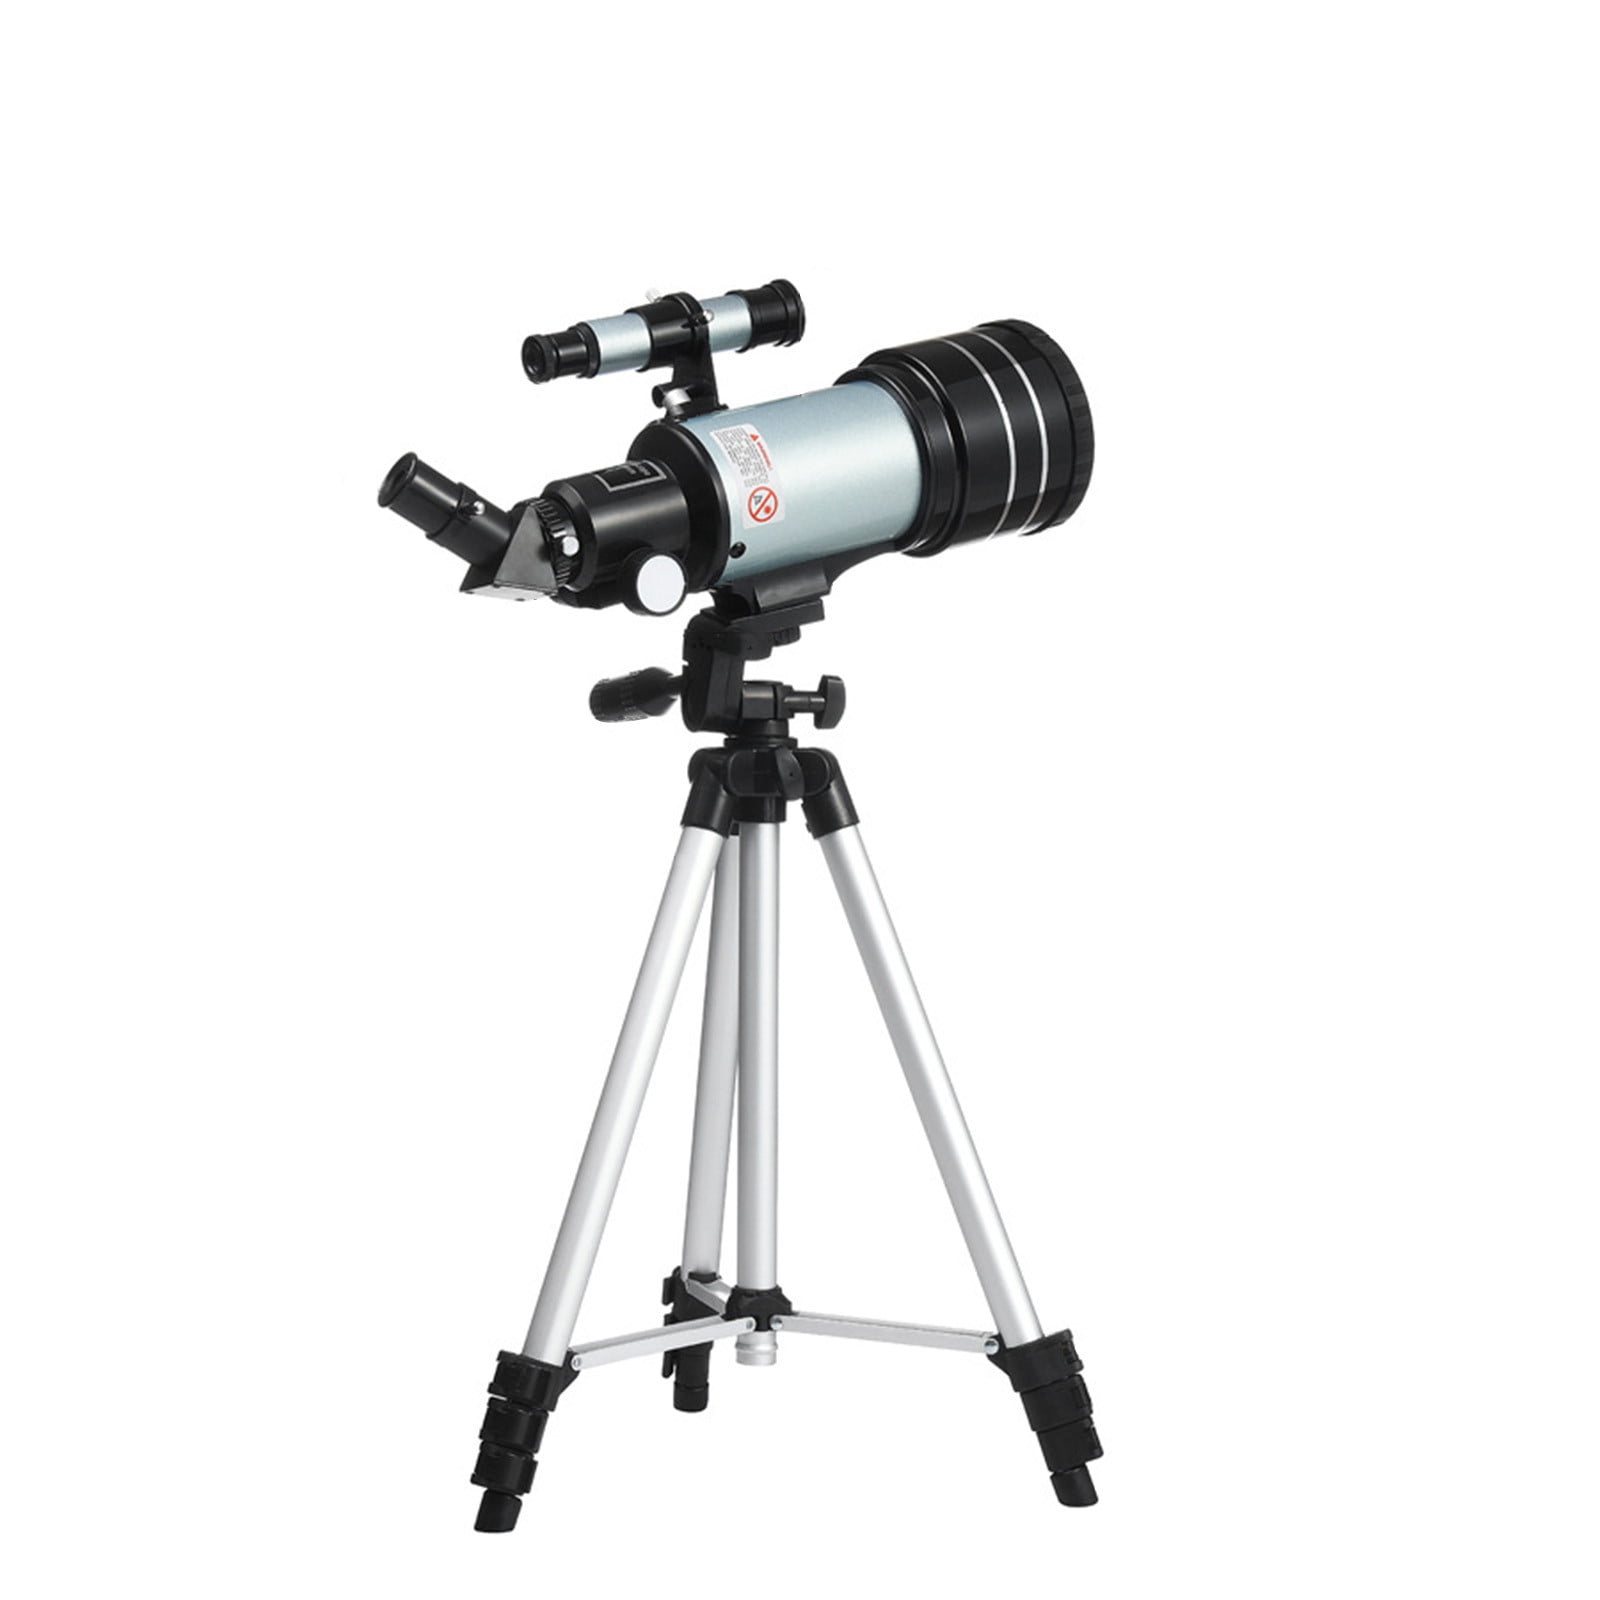 Planets and Stargazing Toys Gifts Astronomical Telescope with Tripod,Telescopes for Astronomy Beginners,Telescope for Kid Stargazing Astronomical Telescope for Moon 